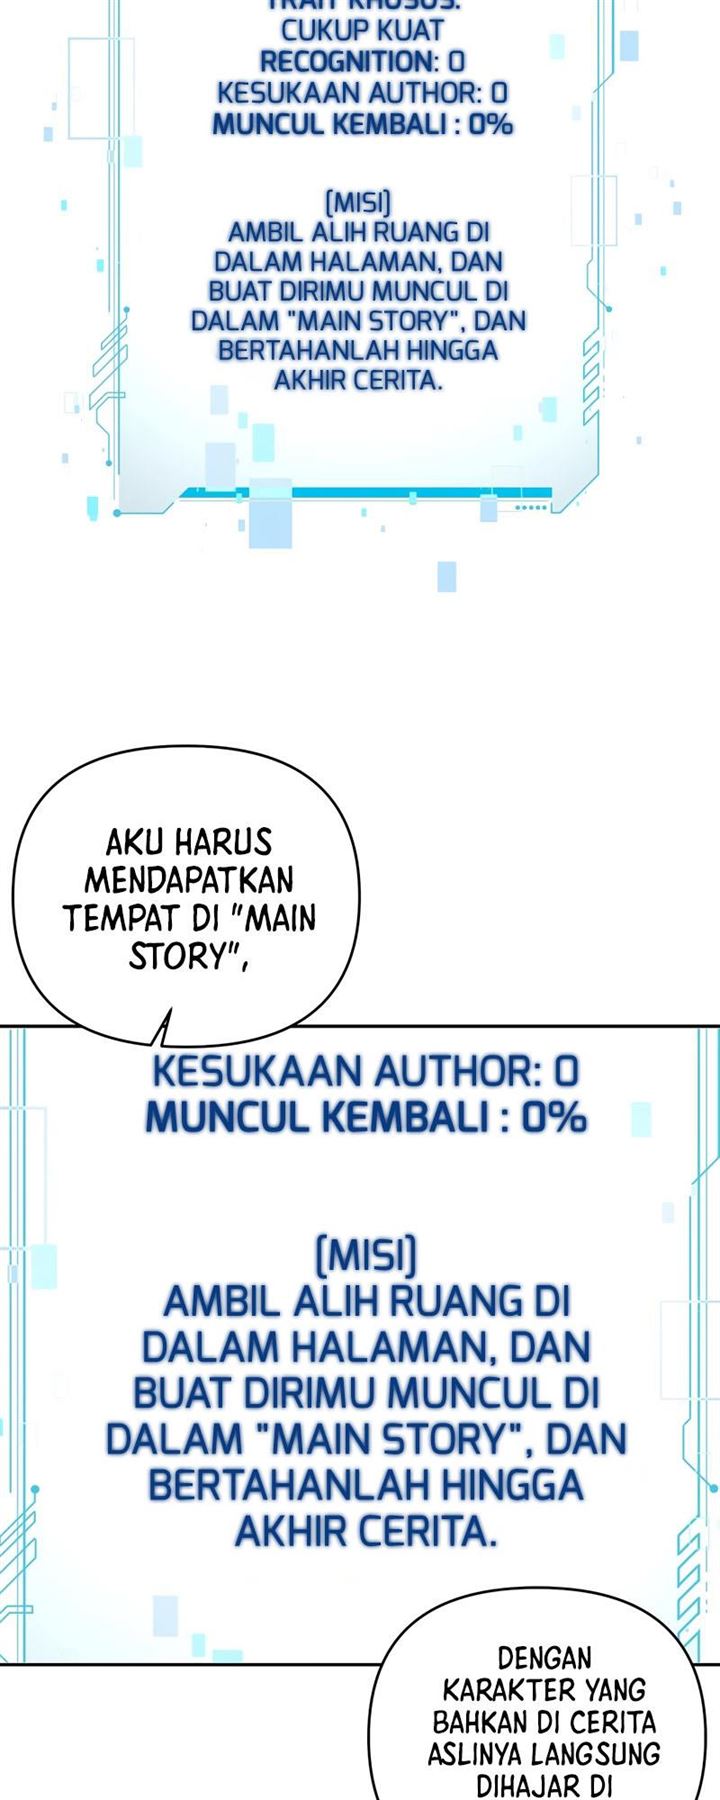 Surviving in an Action Manhwa Chapter 1